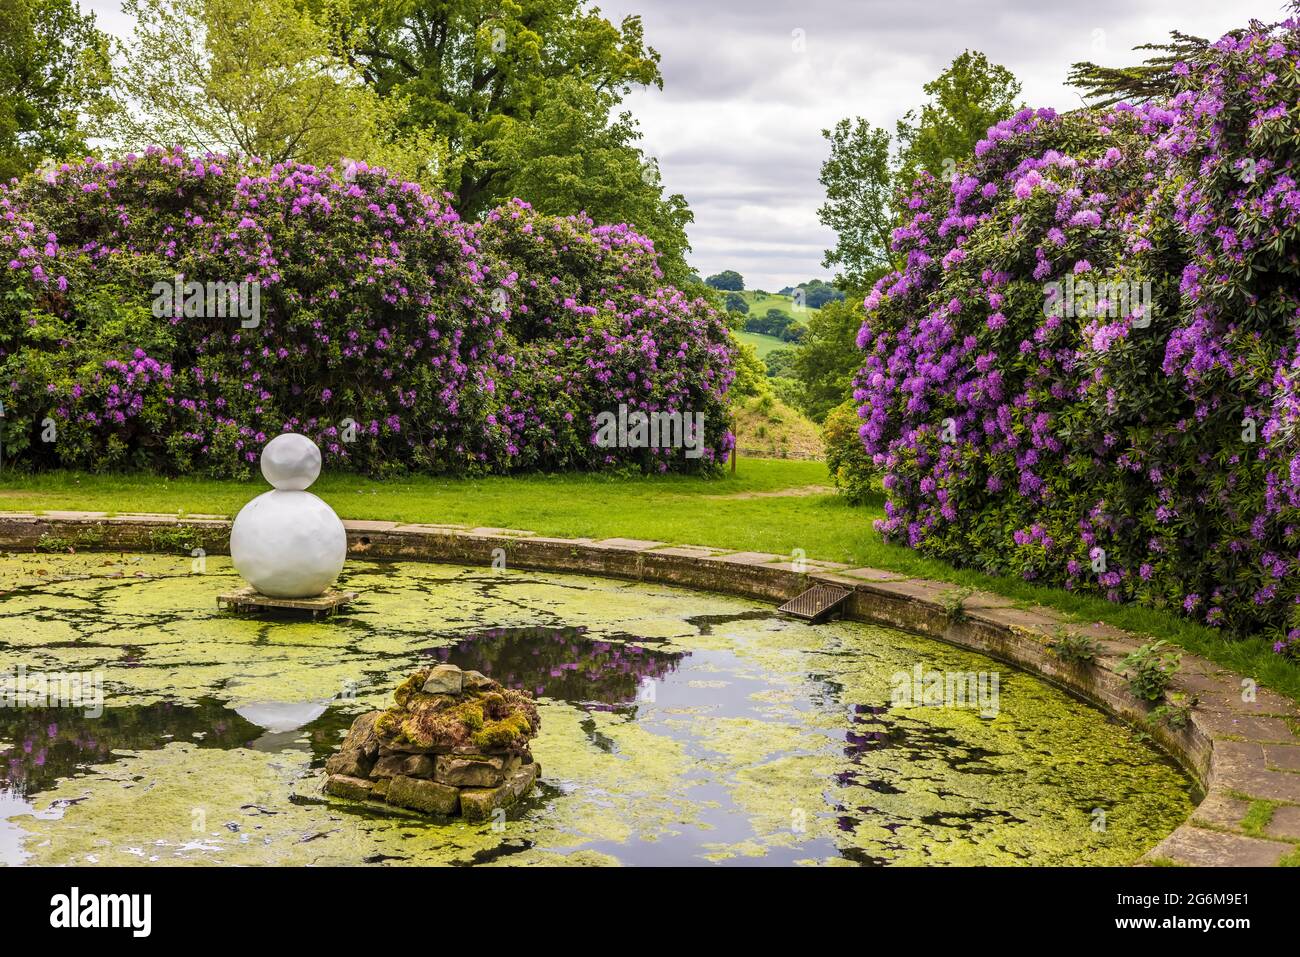 Yorkshire Sculpture Park near Wakefield, rural landscape with purple rhododendrons and Gary Hume sculpture of Snowman, Two Balls Twinkle White. Stock Photo